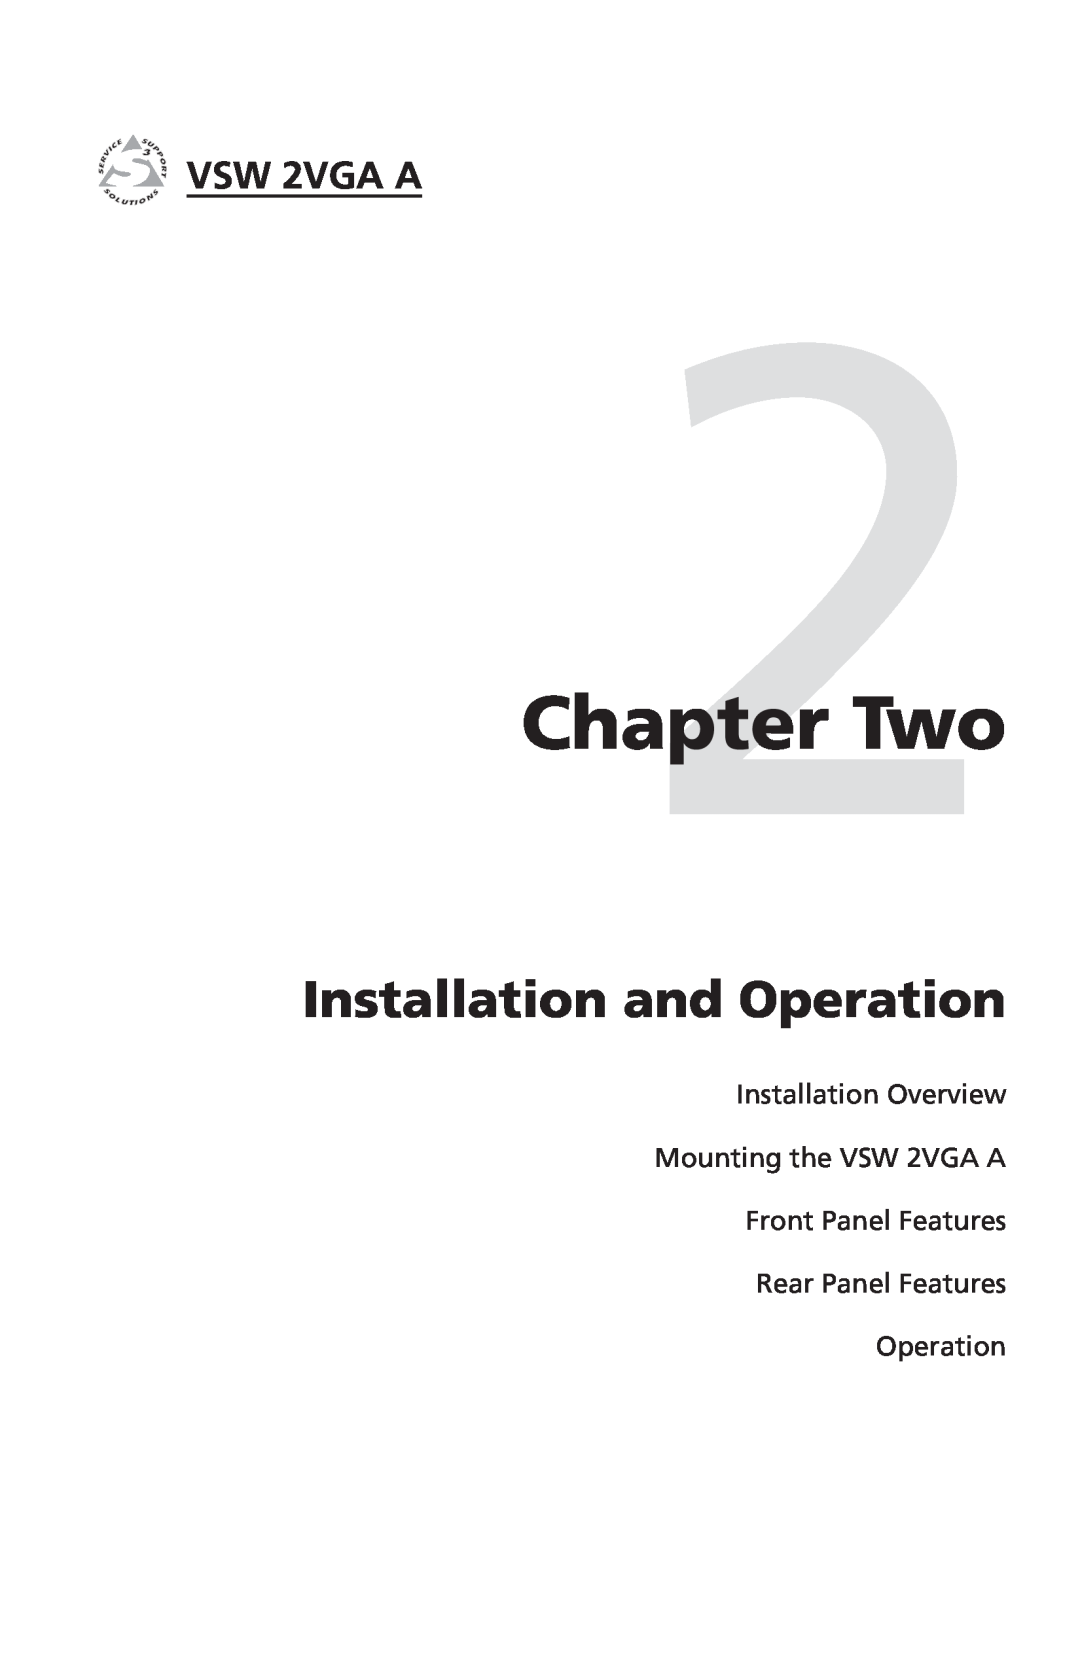 Extron electronic VSW 2VGA A user manual Two, Installation and Operation, Rear Panel Features Operation 